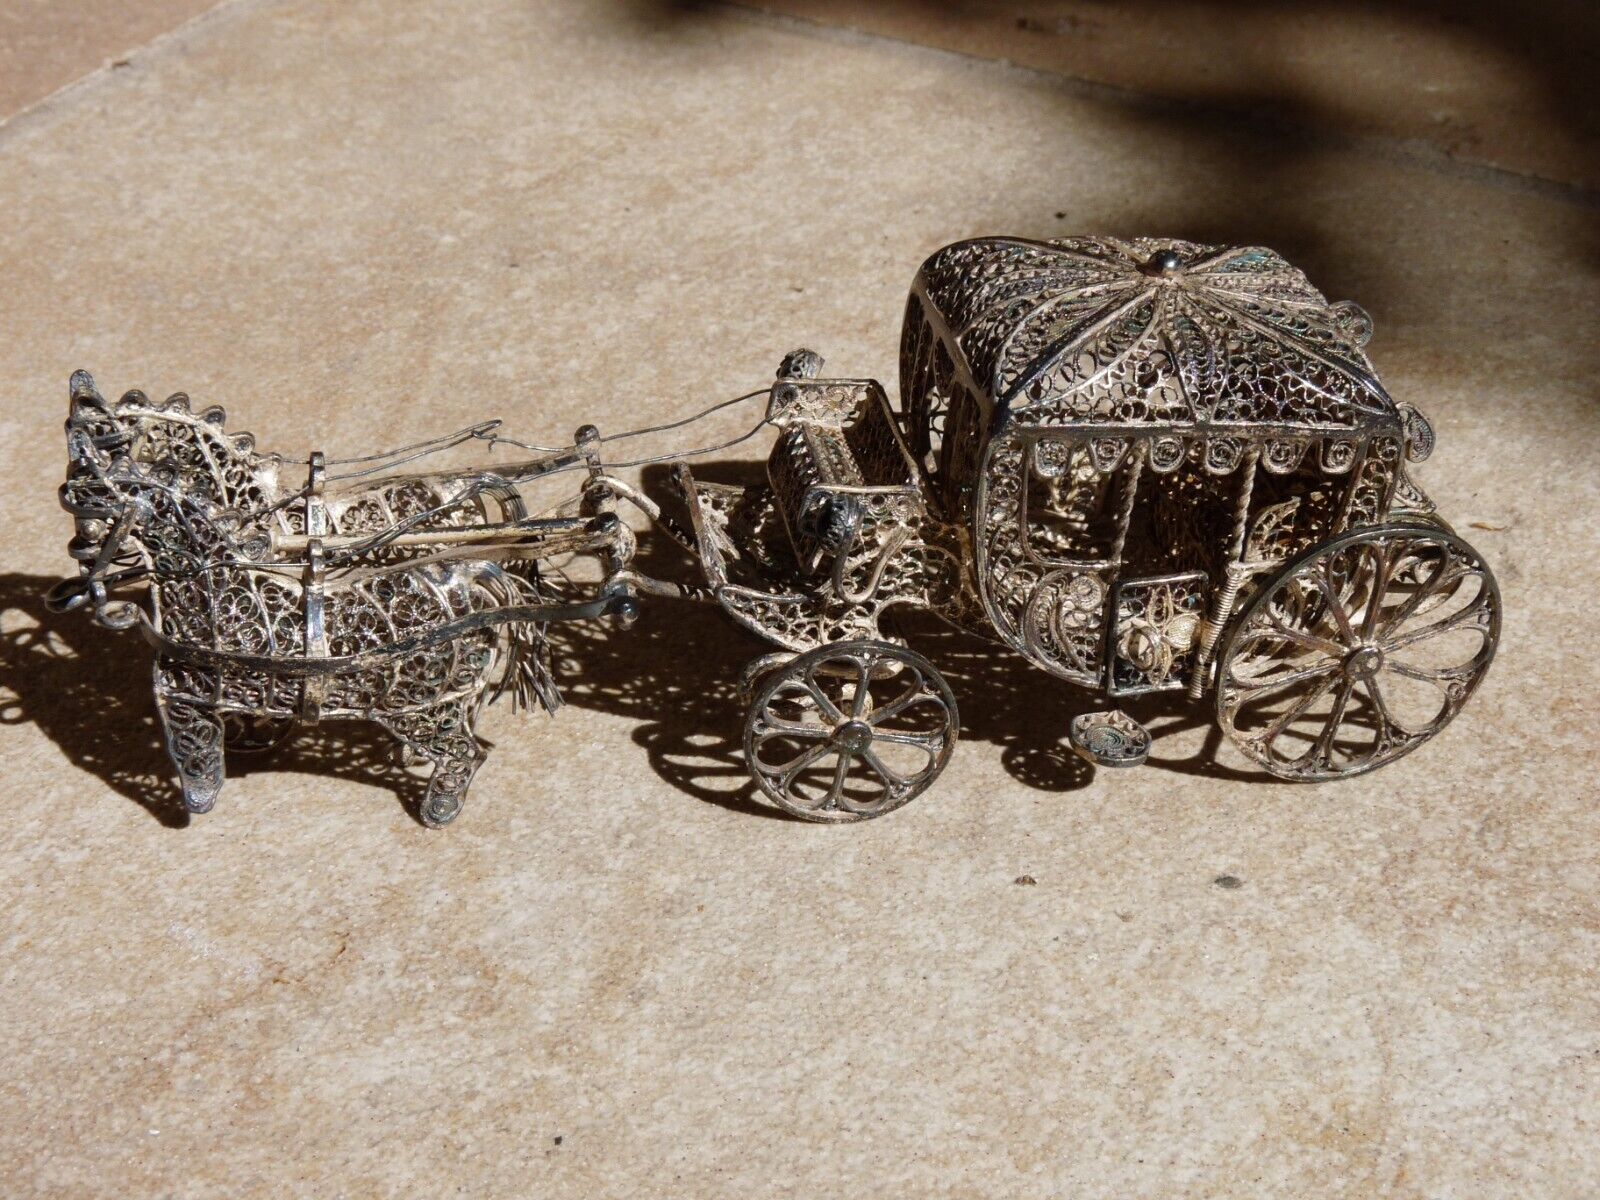 Vintage Silver Filigree Horses and Carriage detailed royalty